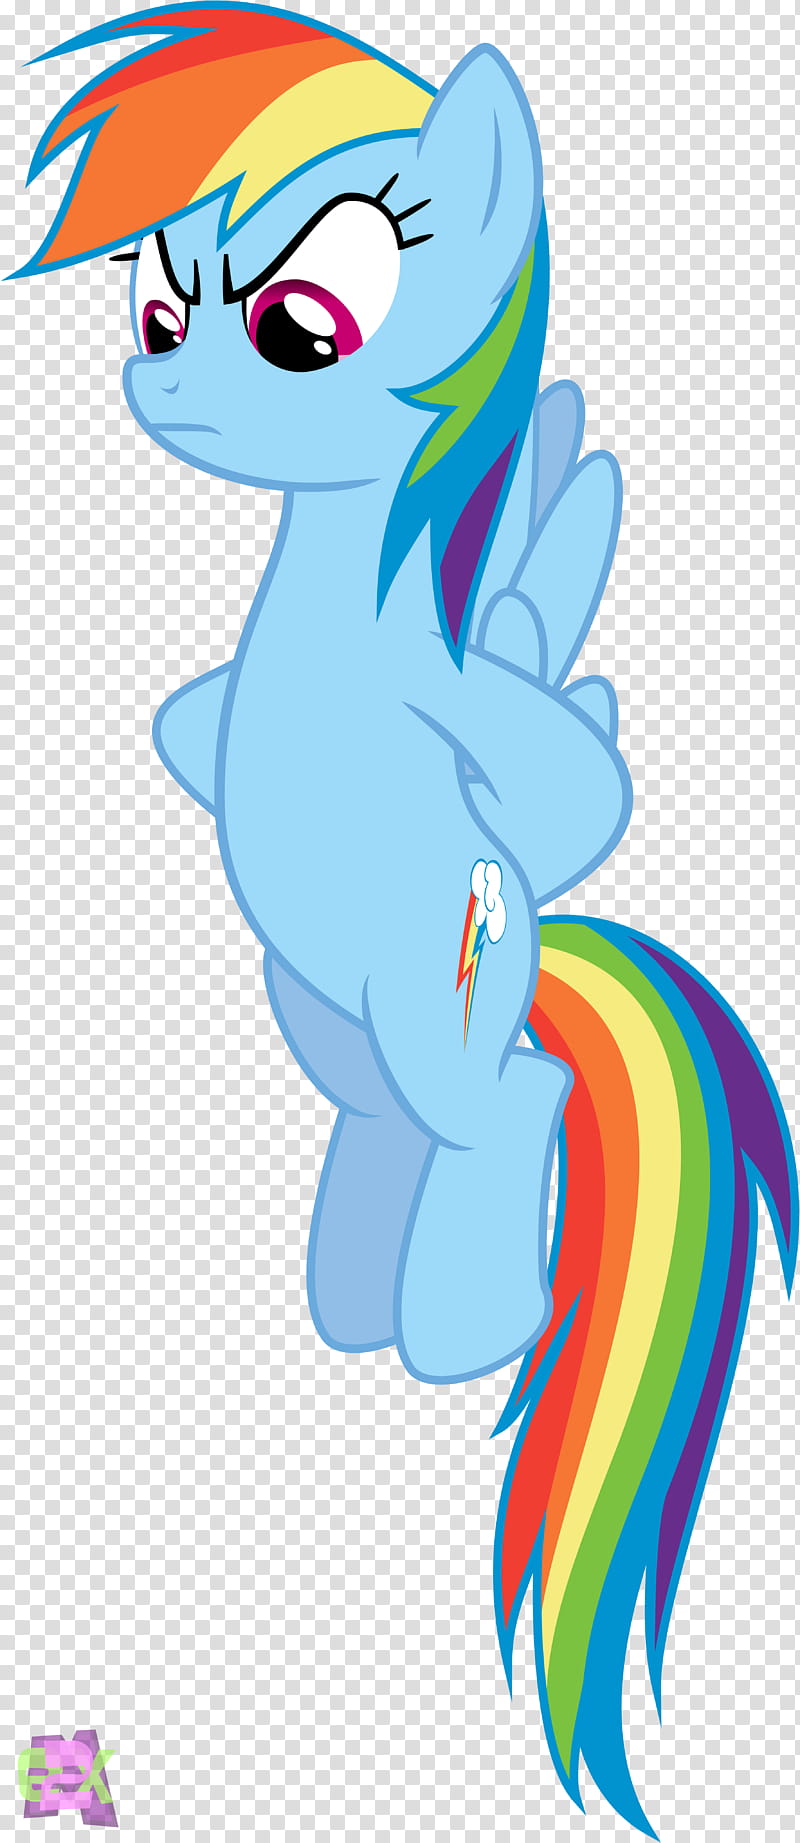 MLP Rainbow Dash is angry or something transparent background PNG clipart